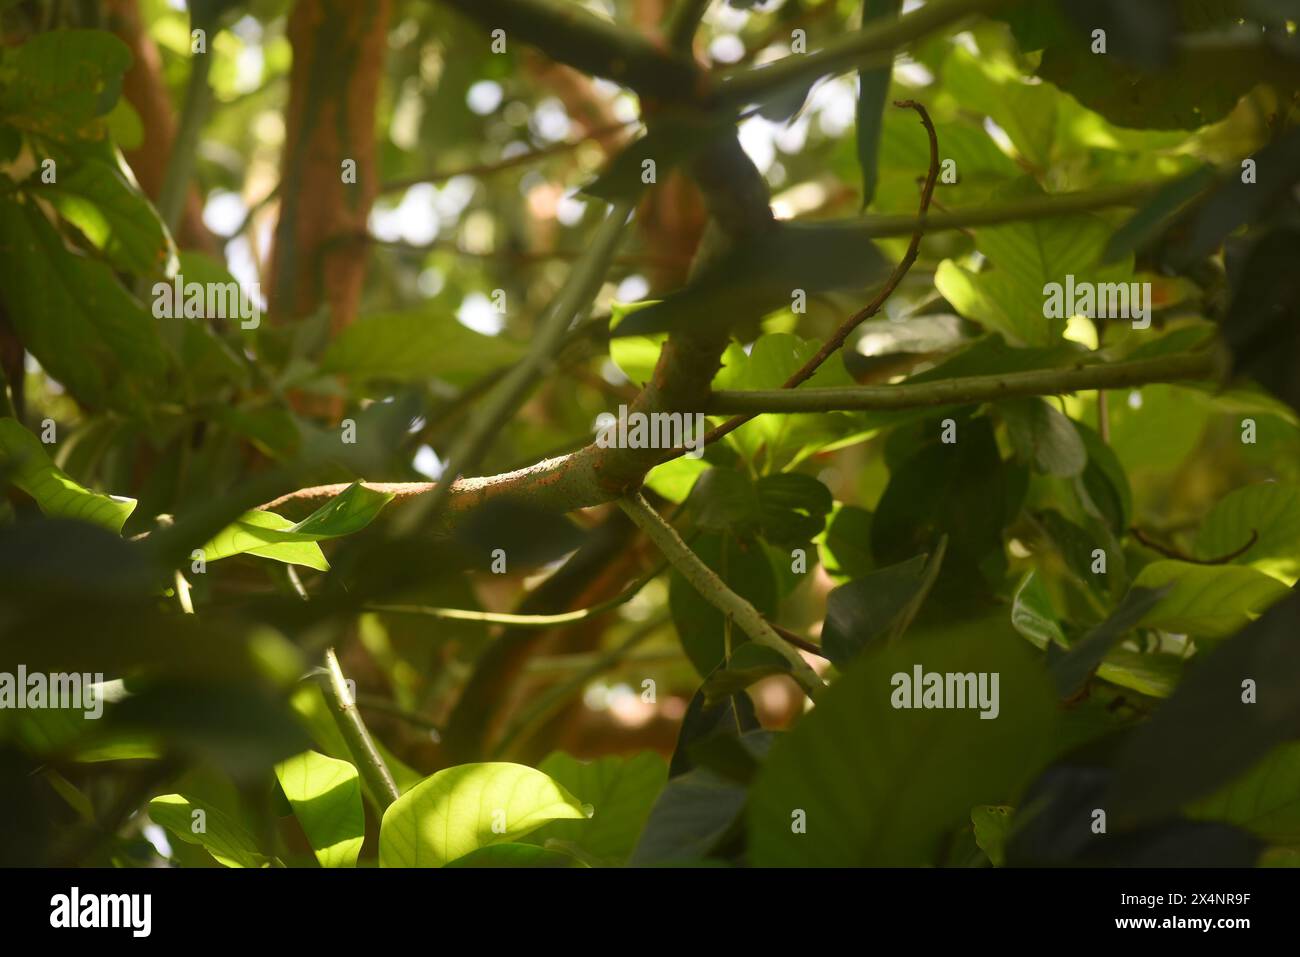 Foliage of a thick amazon forest tree with close branches, dried twigs, leaves Stock Photo